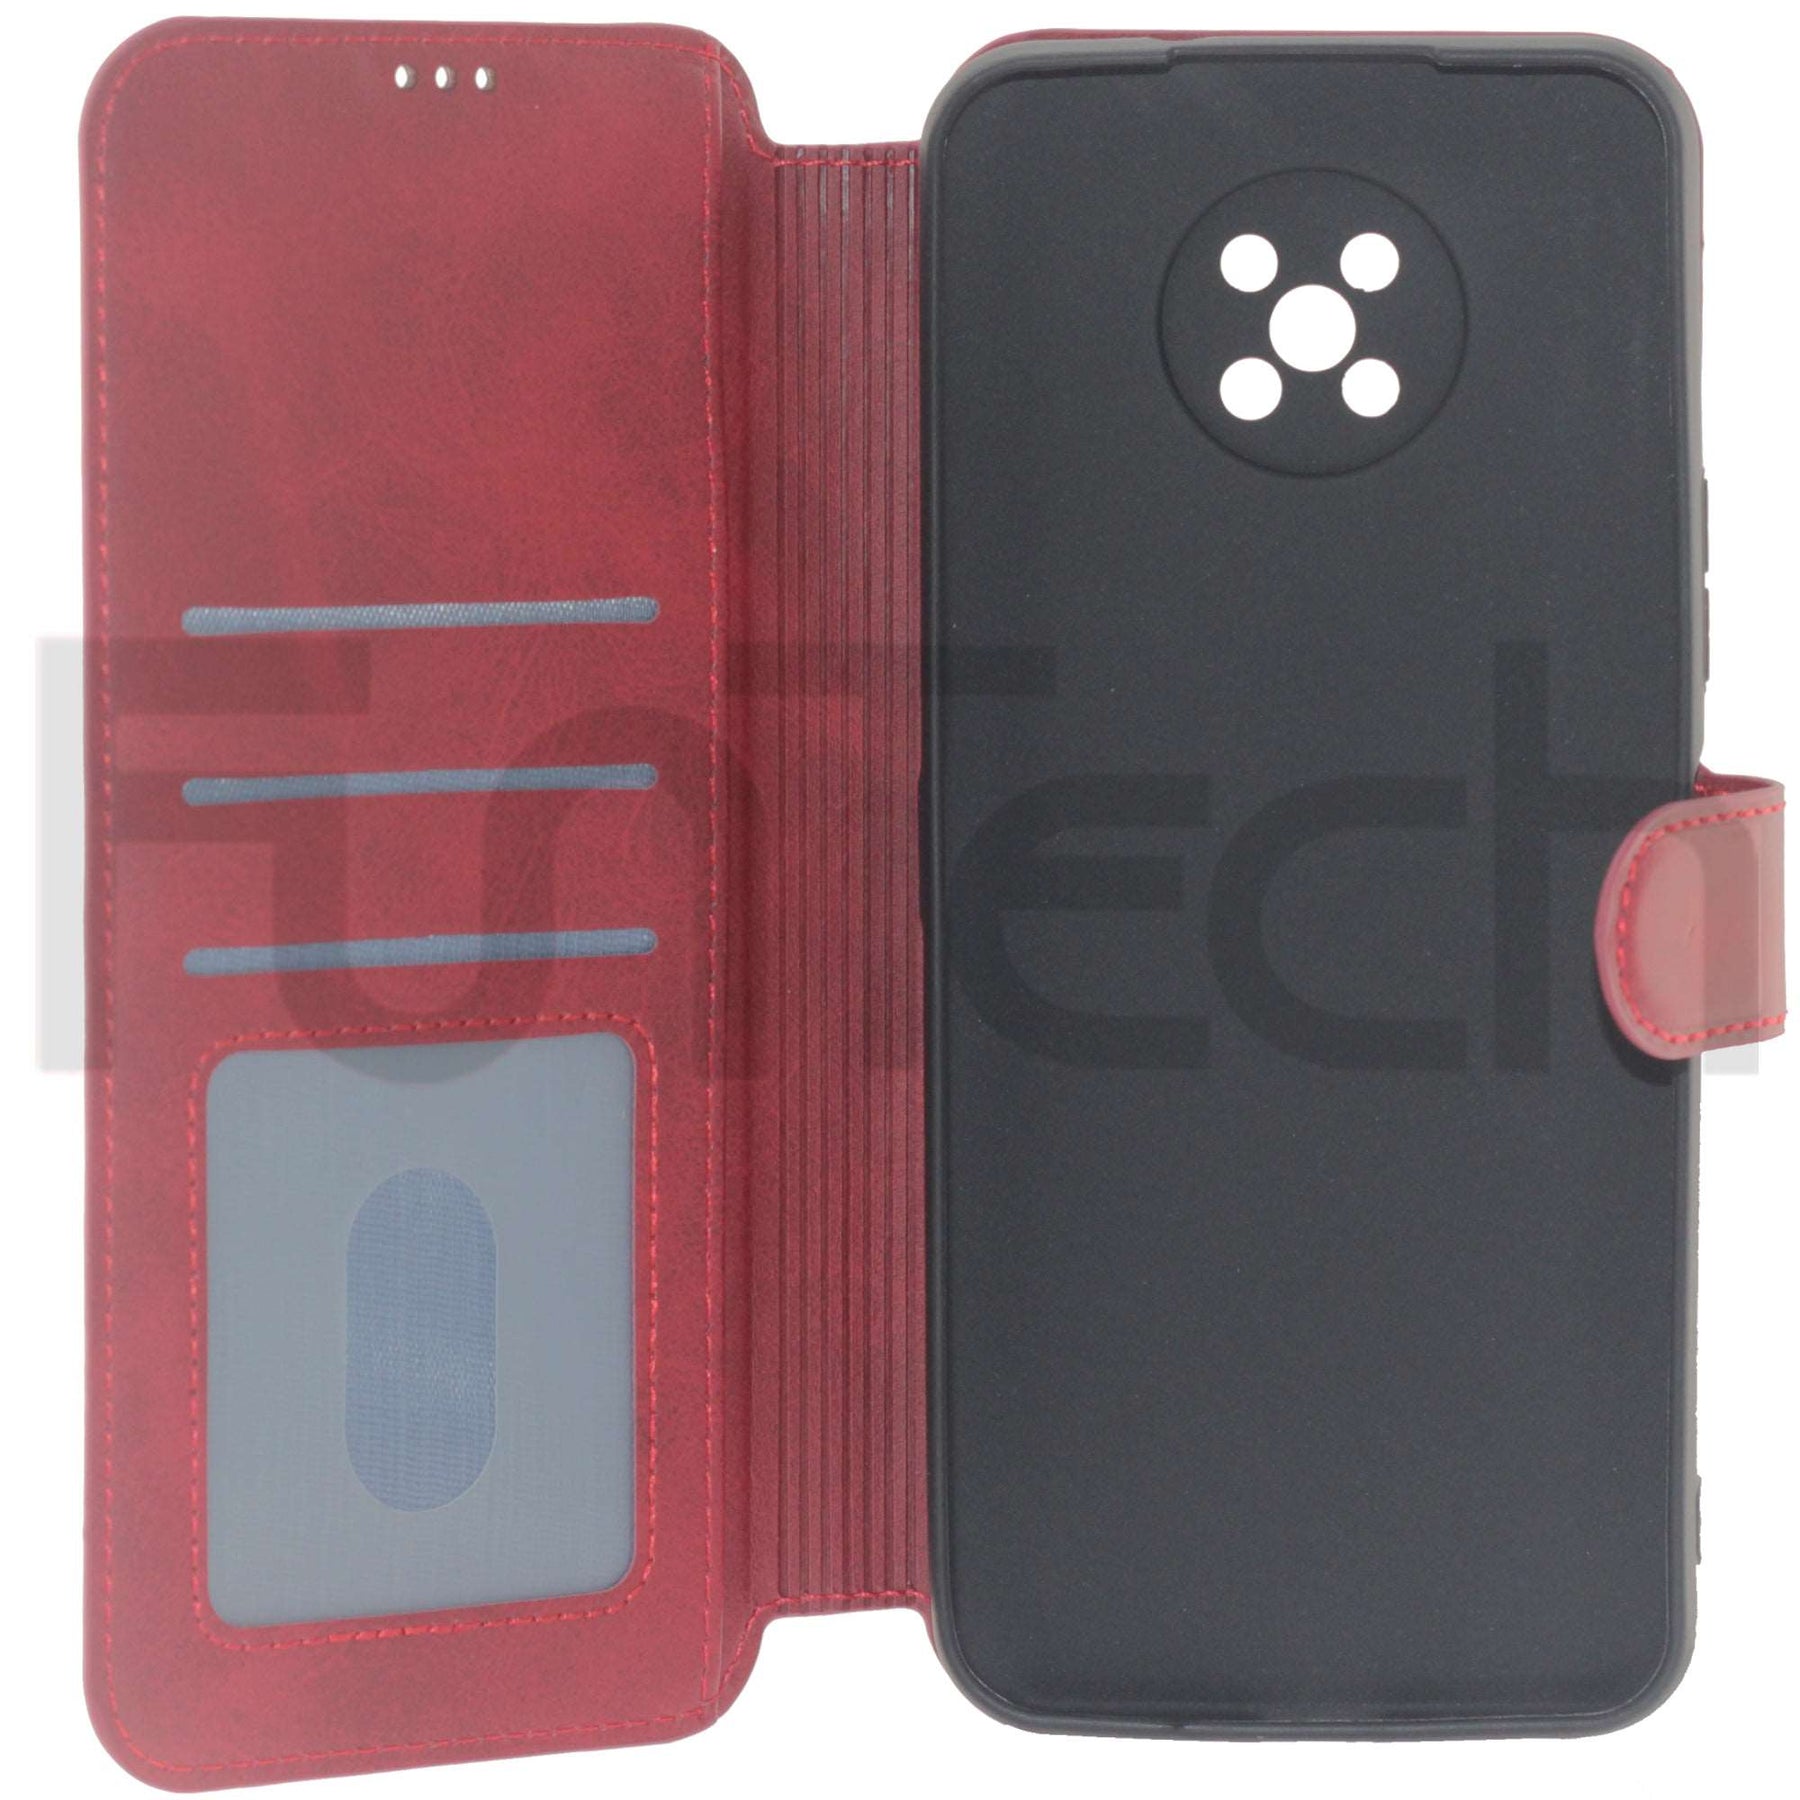 Nokia G50, Leather Wallet Case, Color Red.